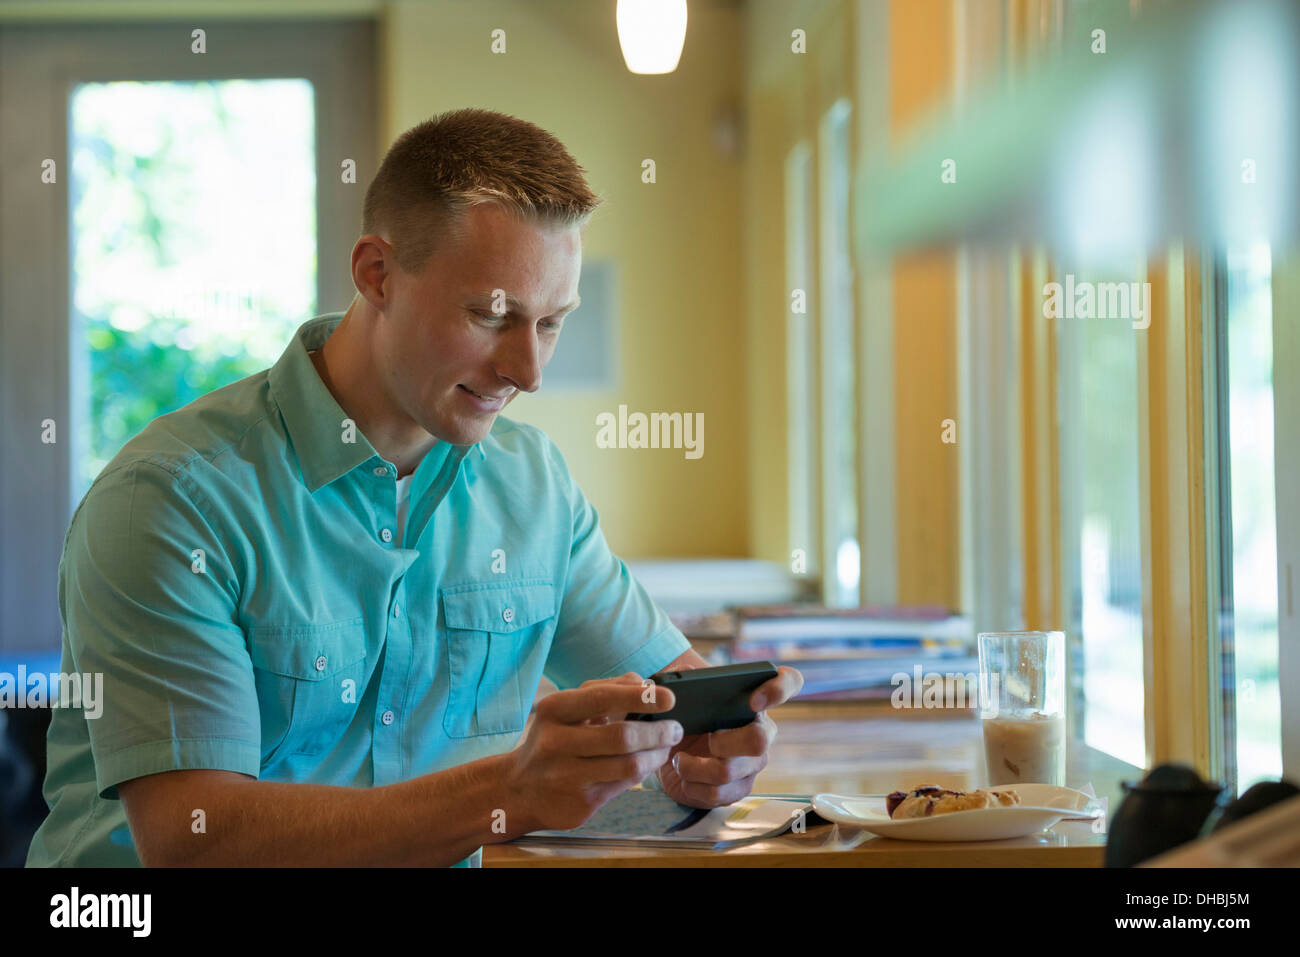 A man with short cropped hair sitting at a cafe table, using a smart phone. Stock Photo